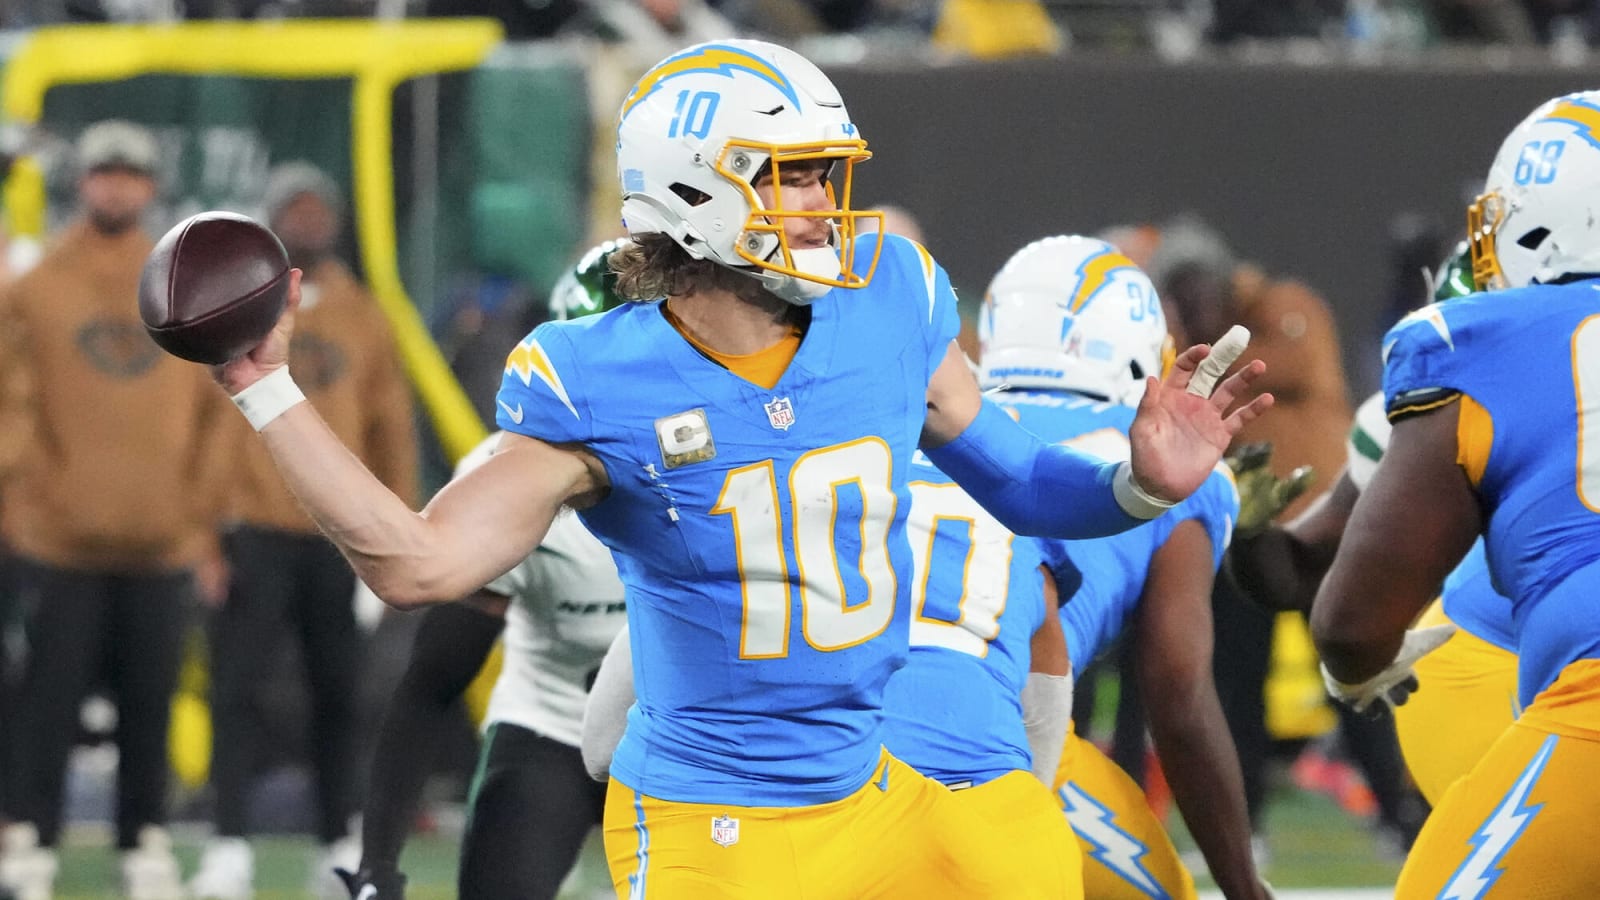 LA Chargers vs Ravens: Five Things the Chargers Must Do To Win In Week 12